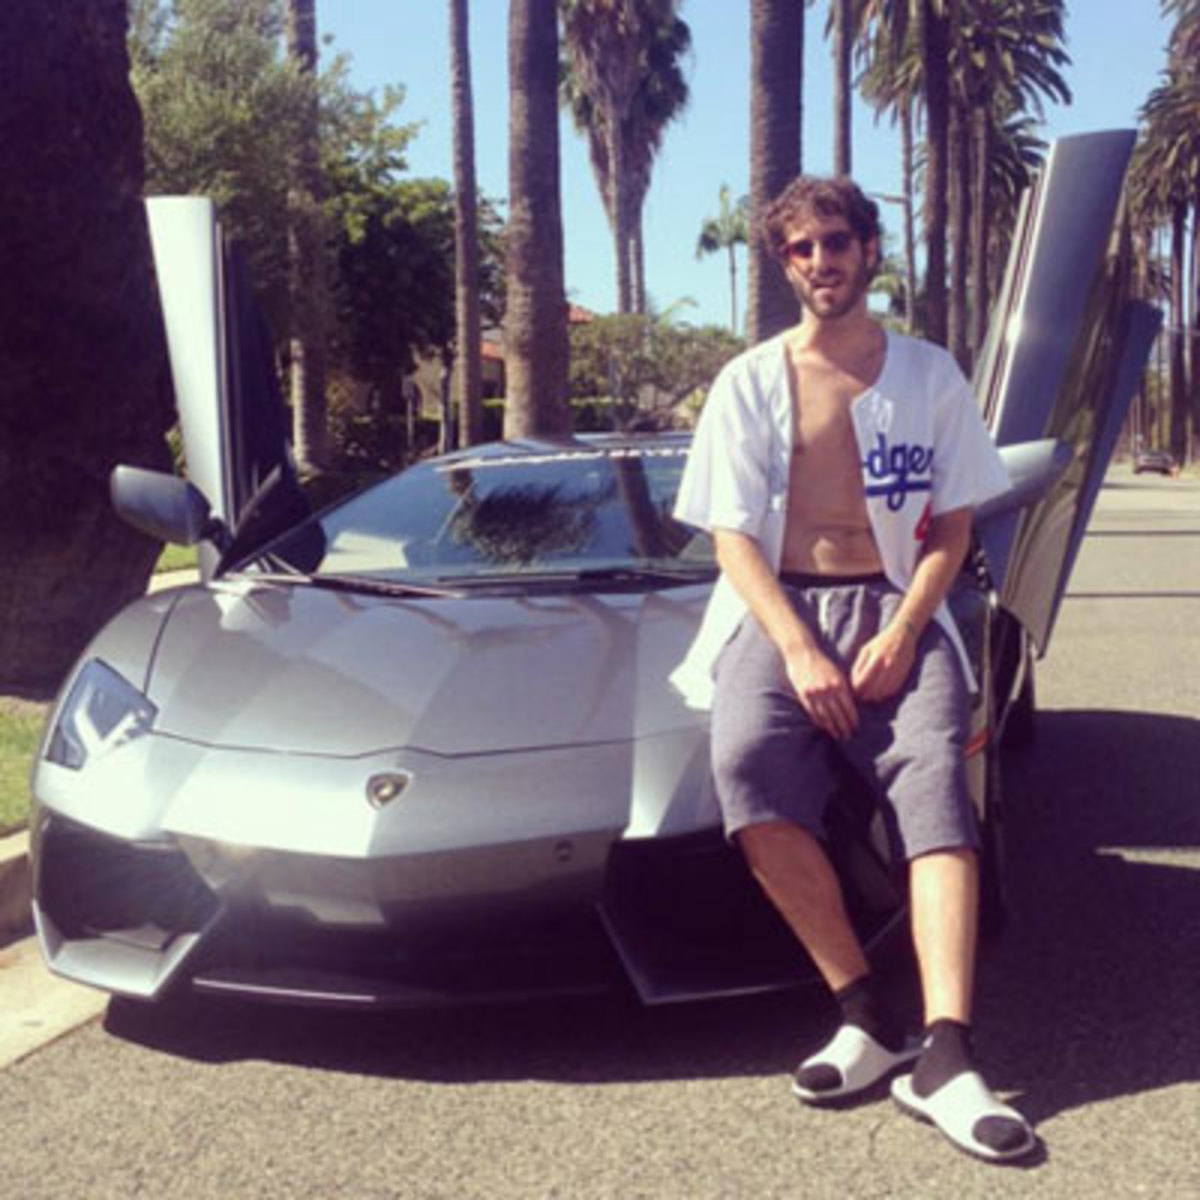 lil dicky makes money filming video